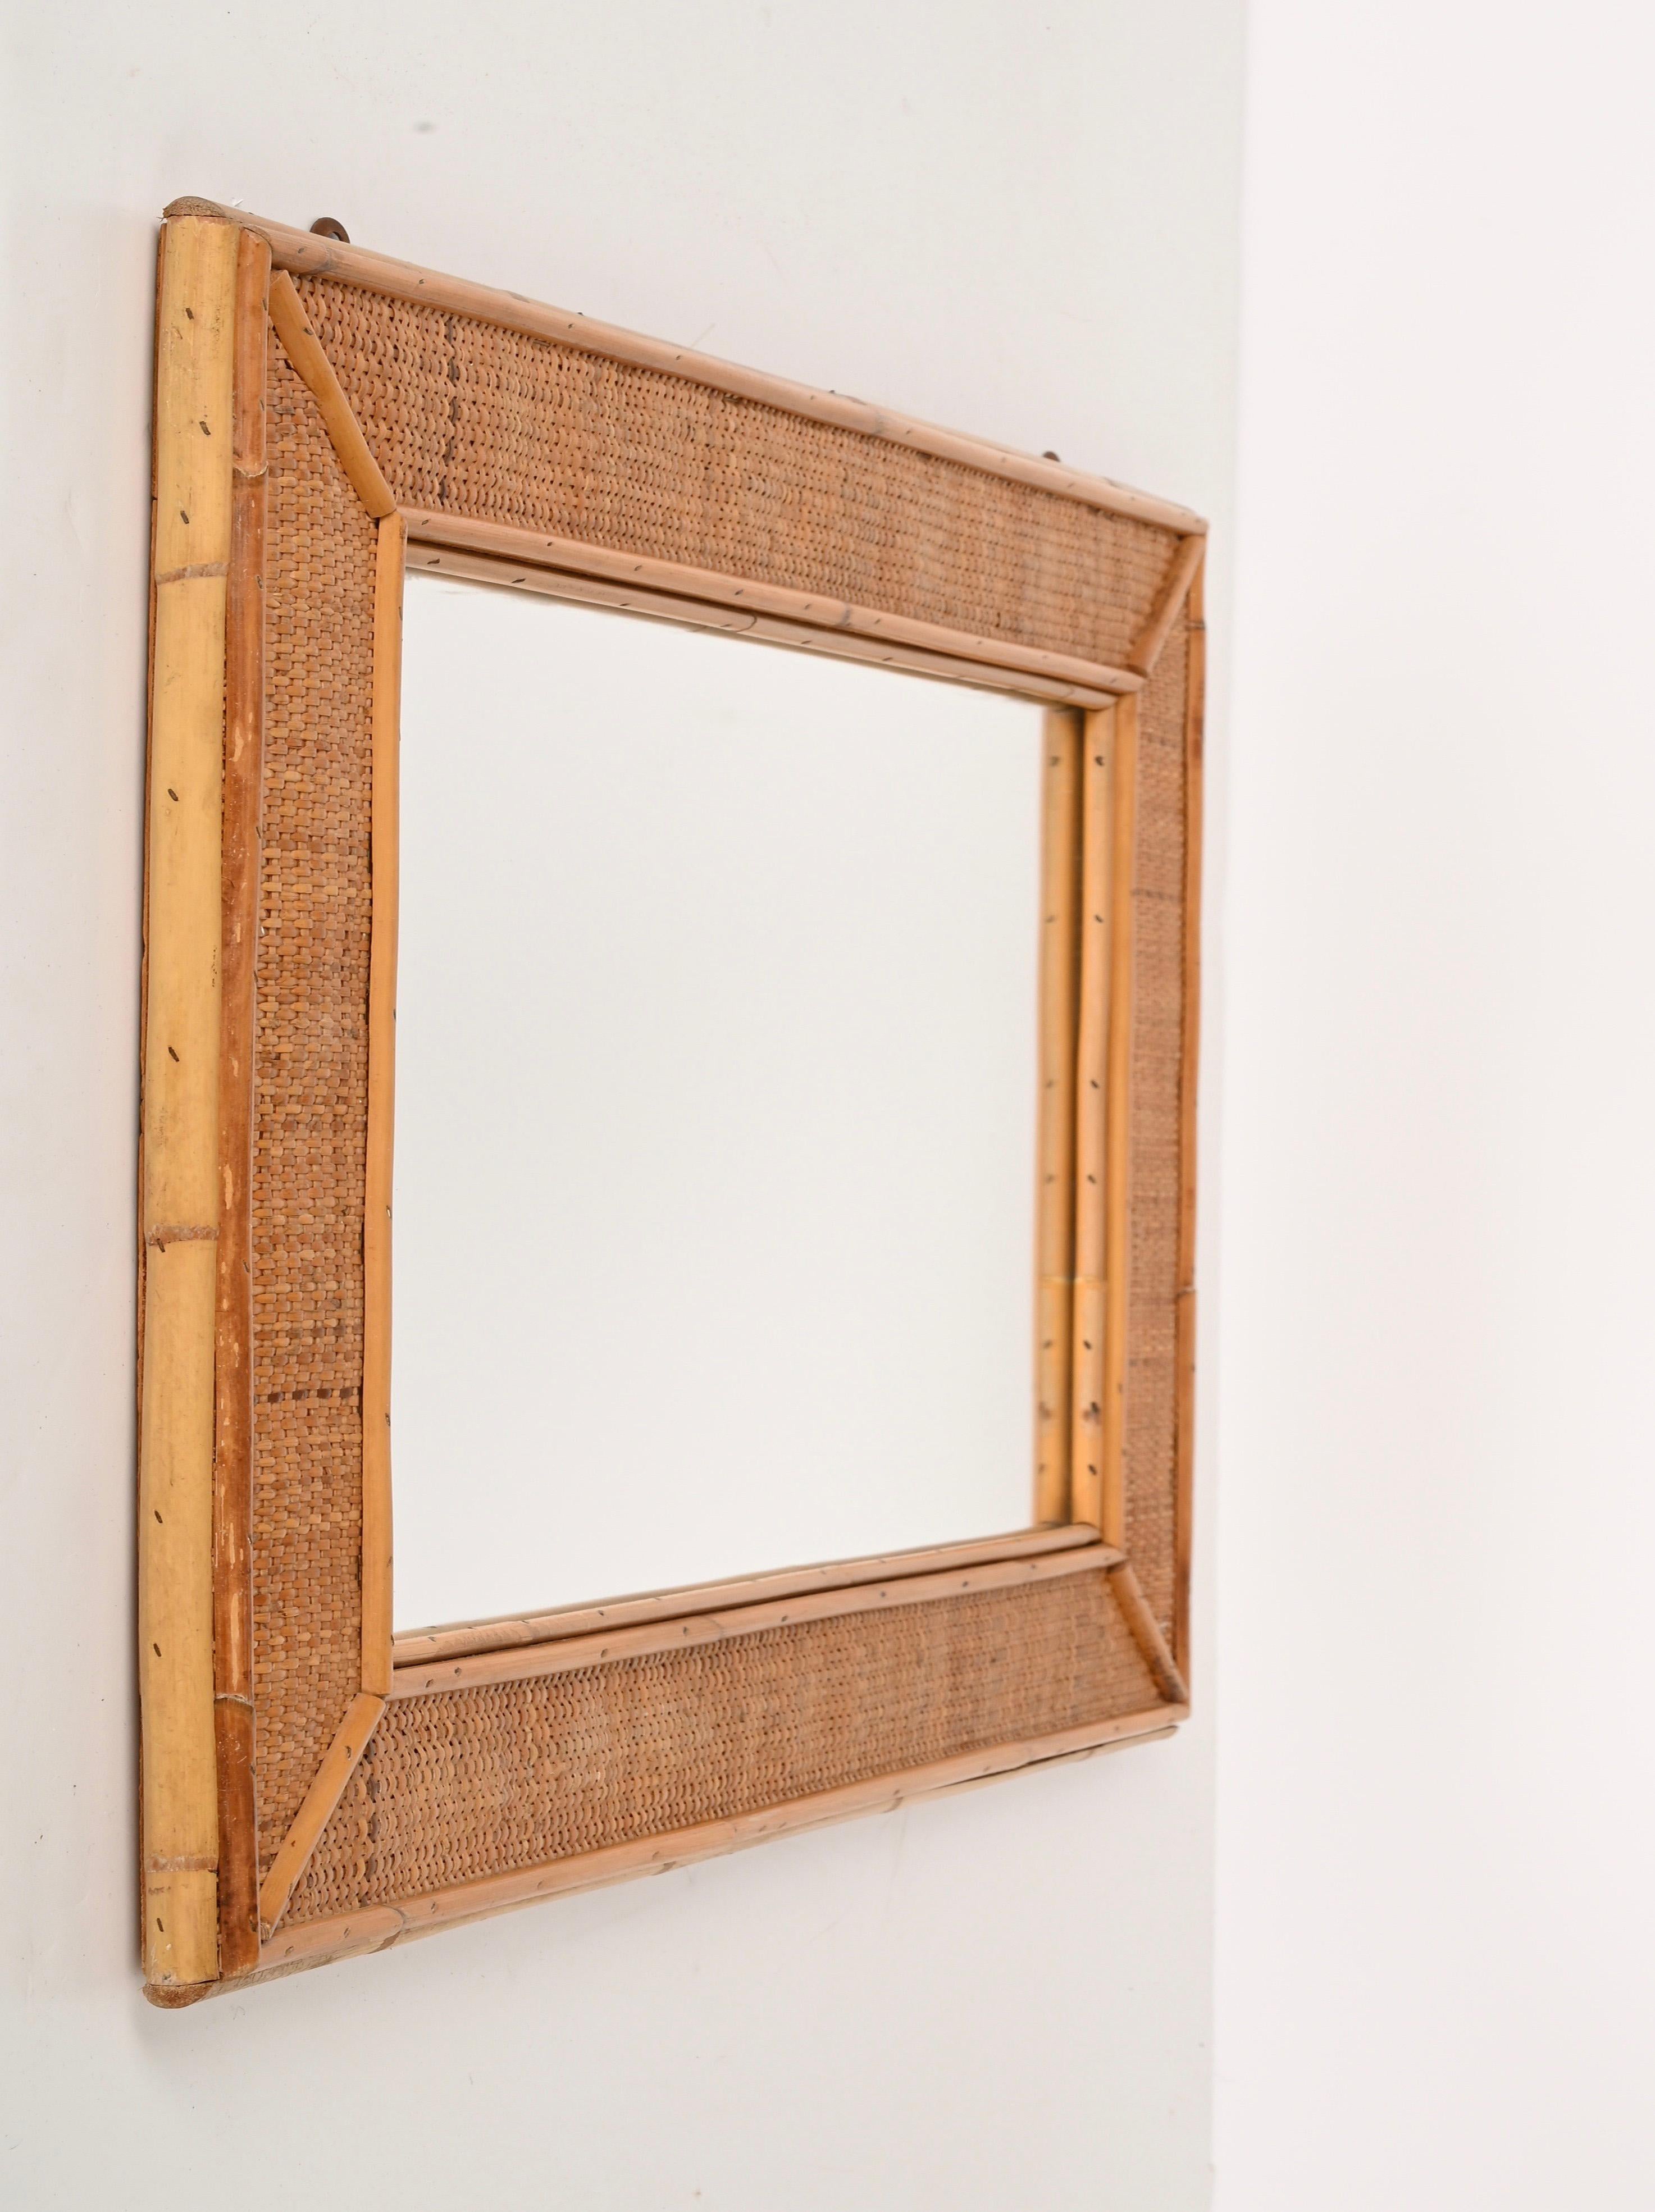 Midcentury Rectangular Italian Mirror with Bamboo and Woven Wicker Frame, 1970s For Sale 1